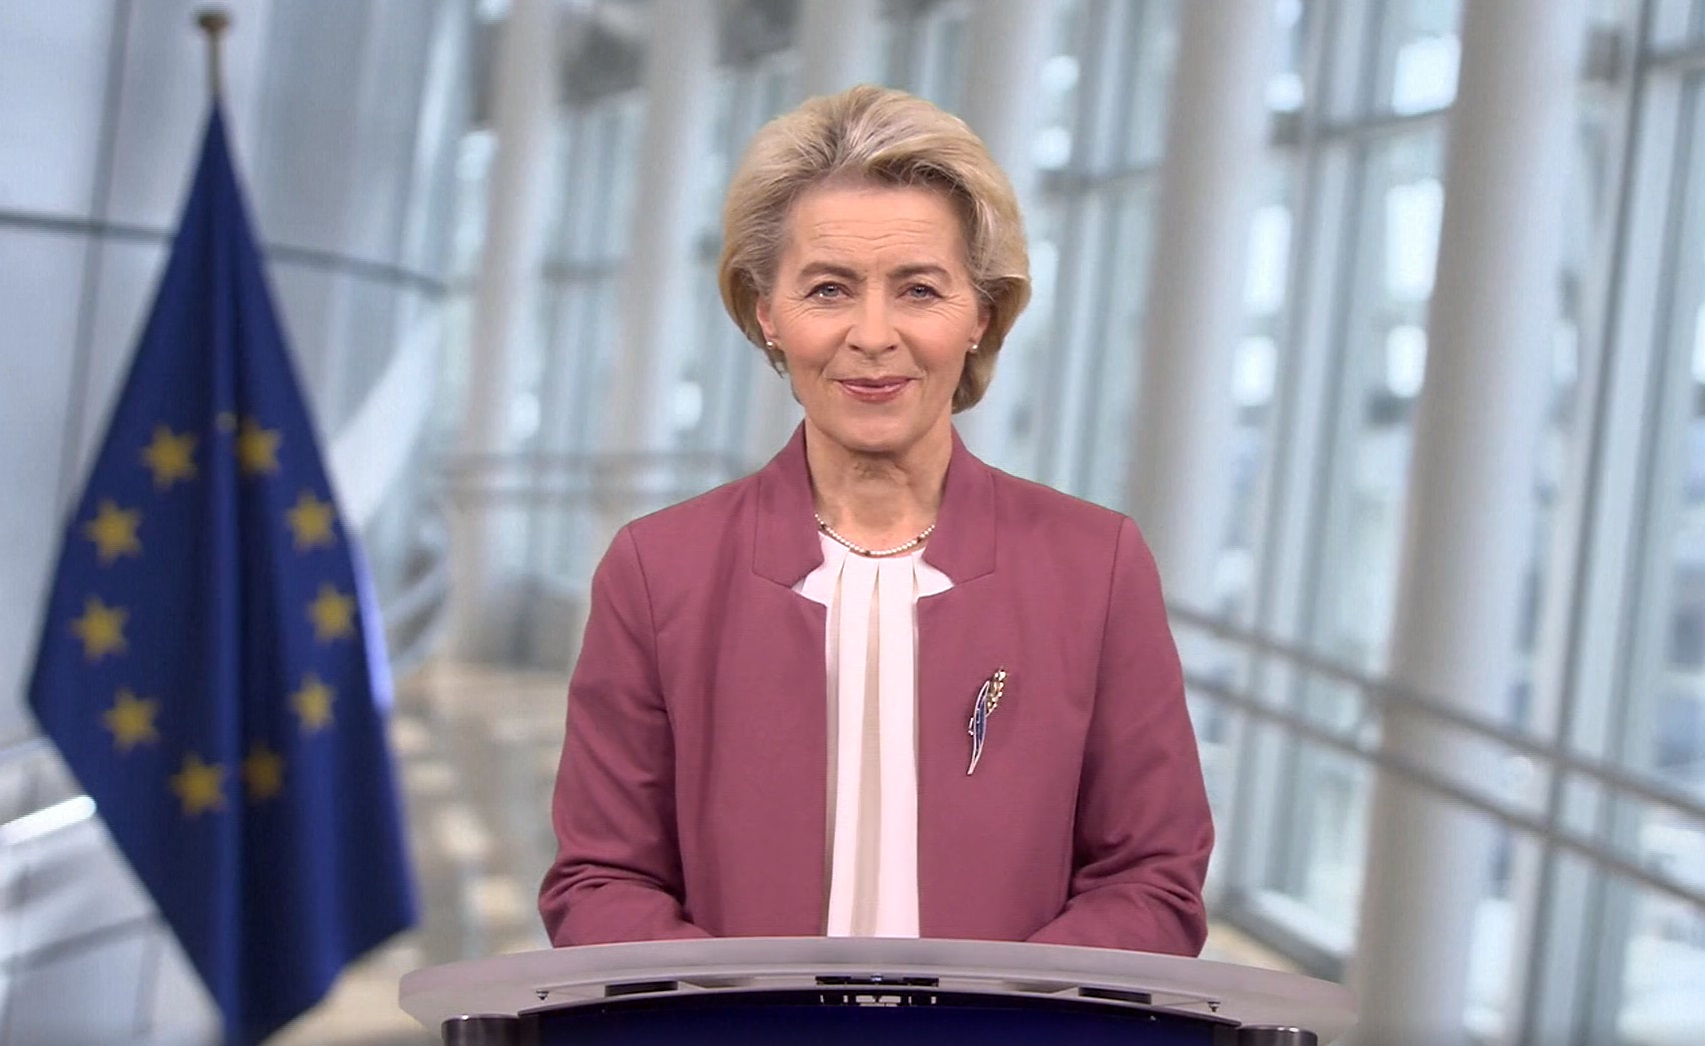 The President of the European Commission, Ursula von der Leyen, announced Green Energy Park project